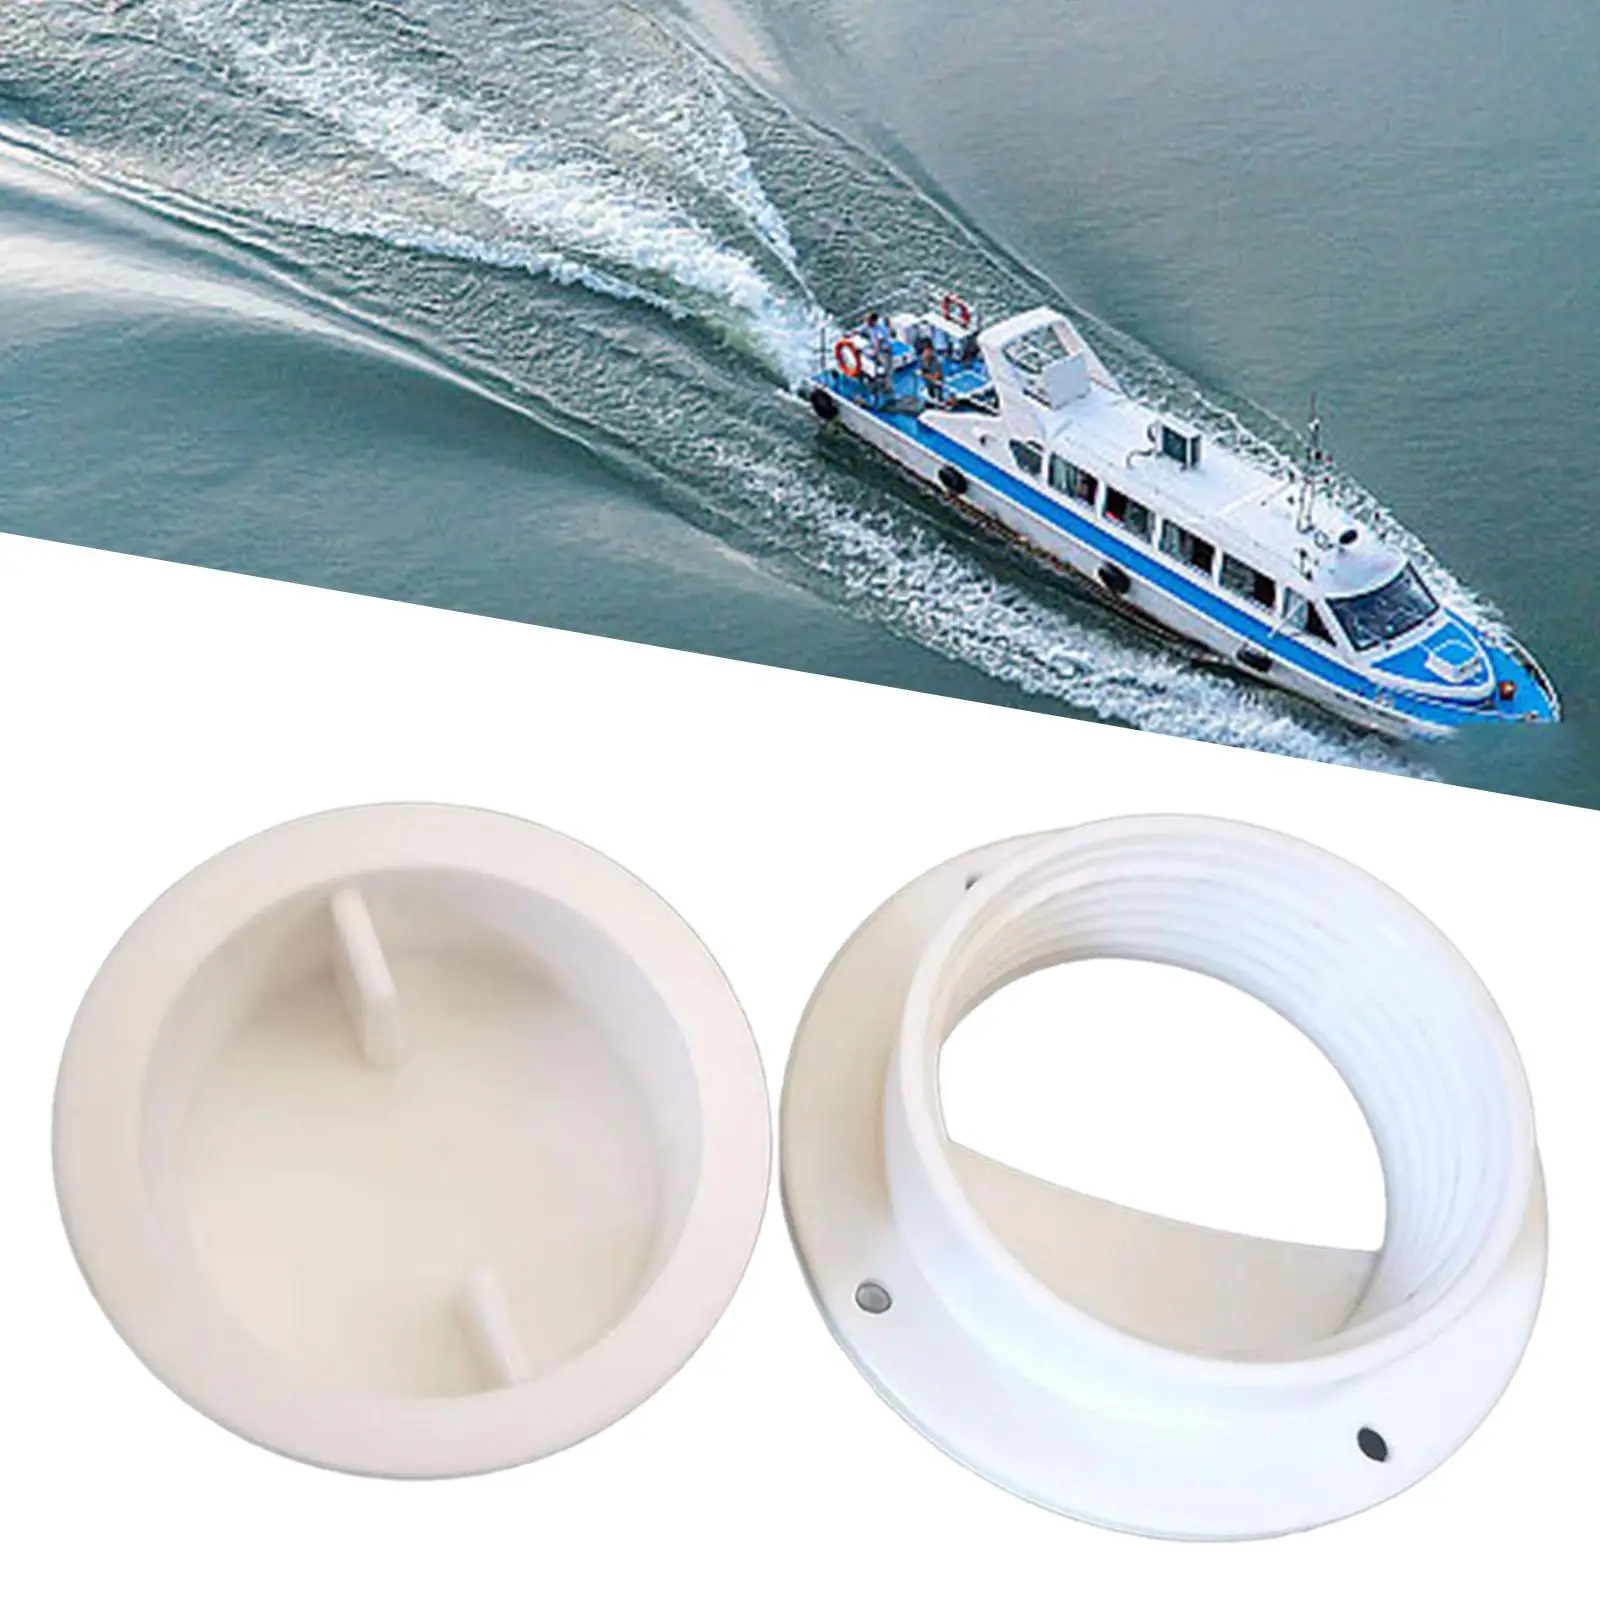 Marine Hull Drains Yacht Draining Connector Boat Accessory Lightweight Universal Boat Drain Boat Scupper for Yachts Boat